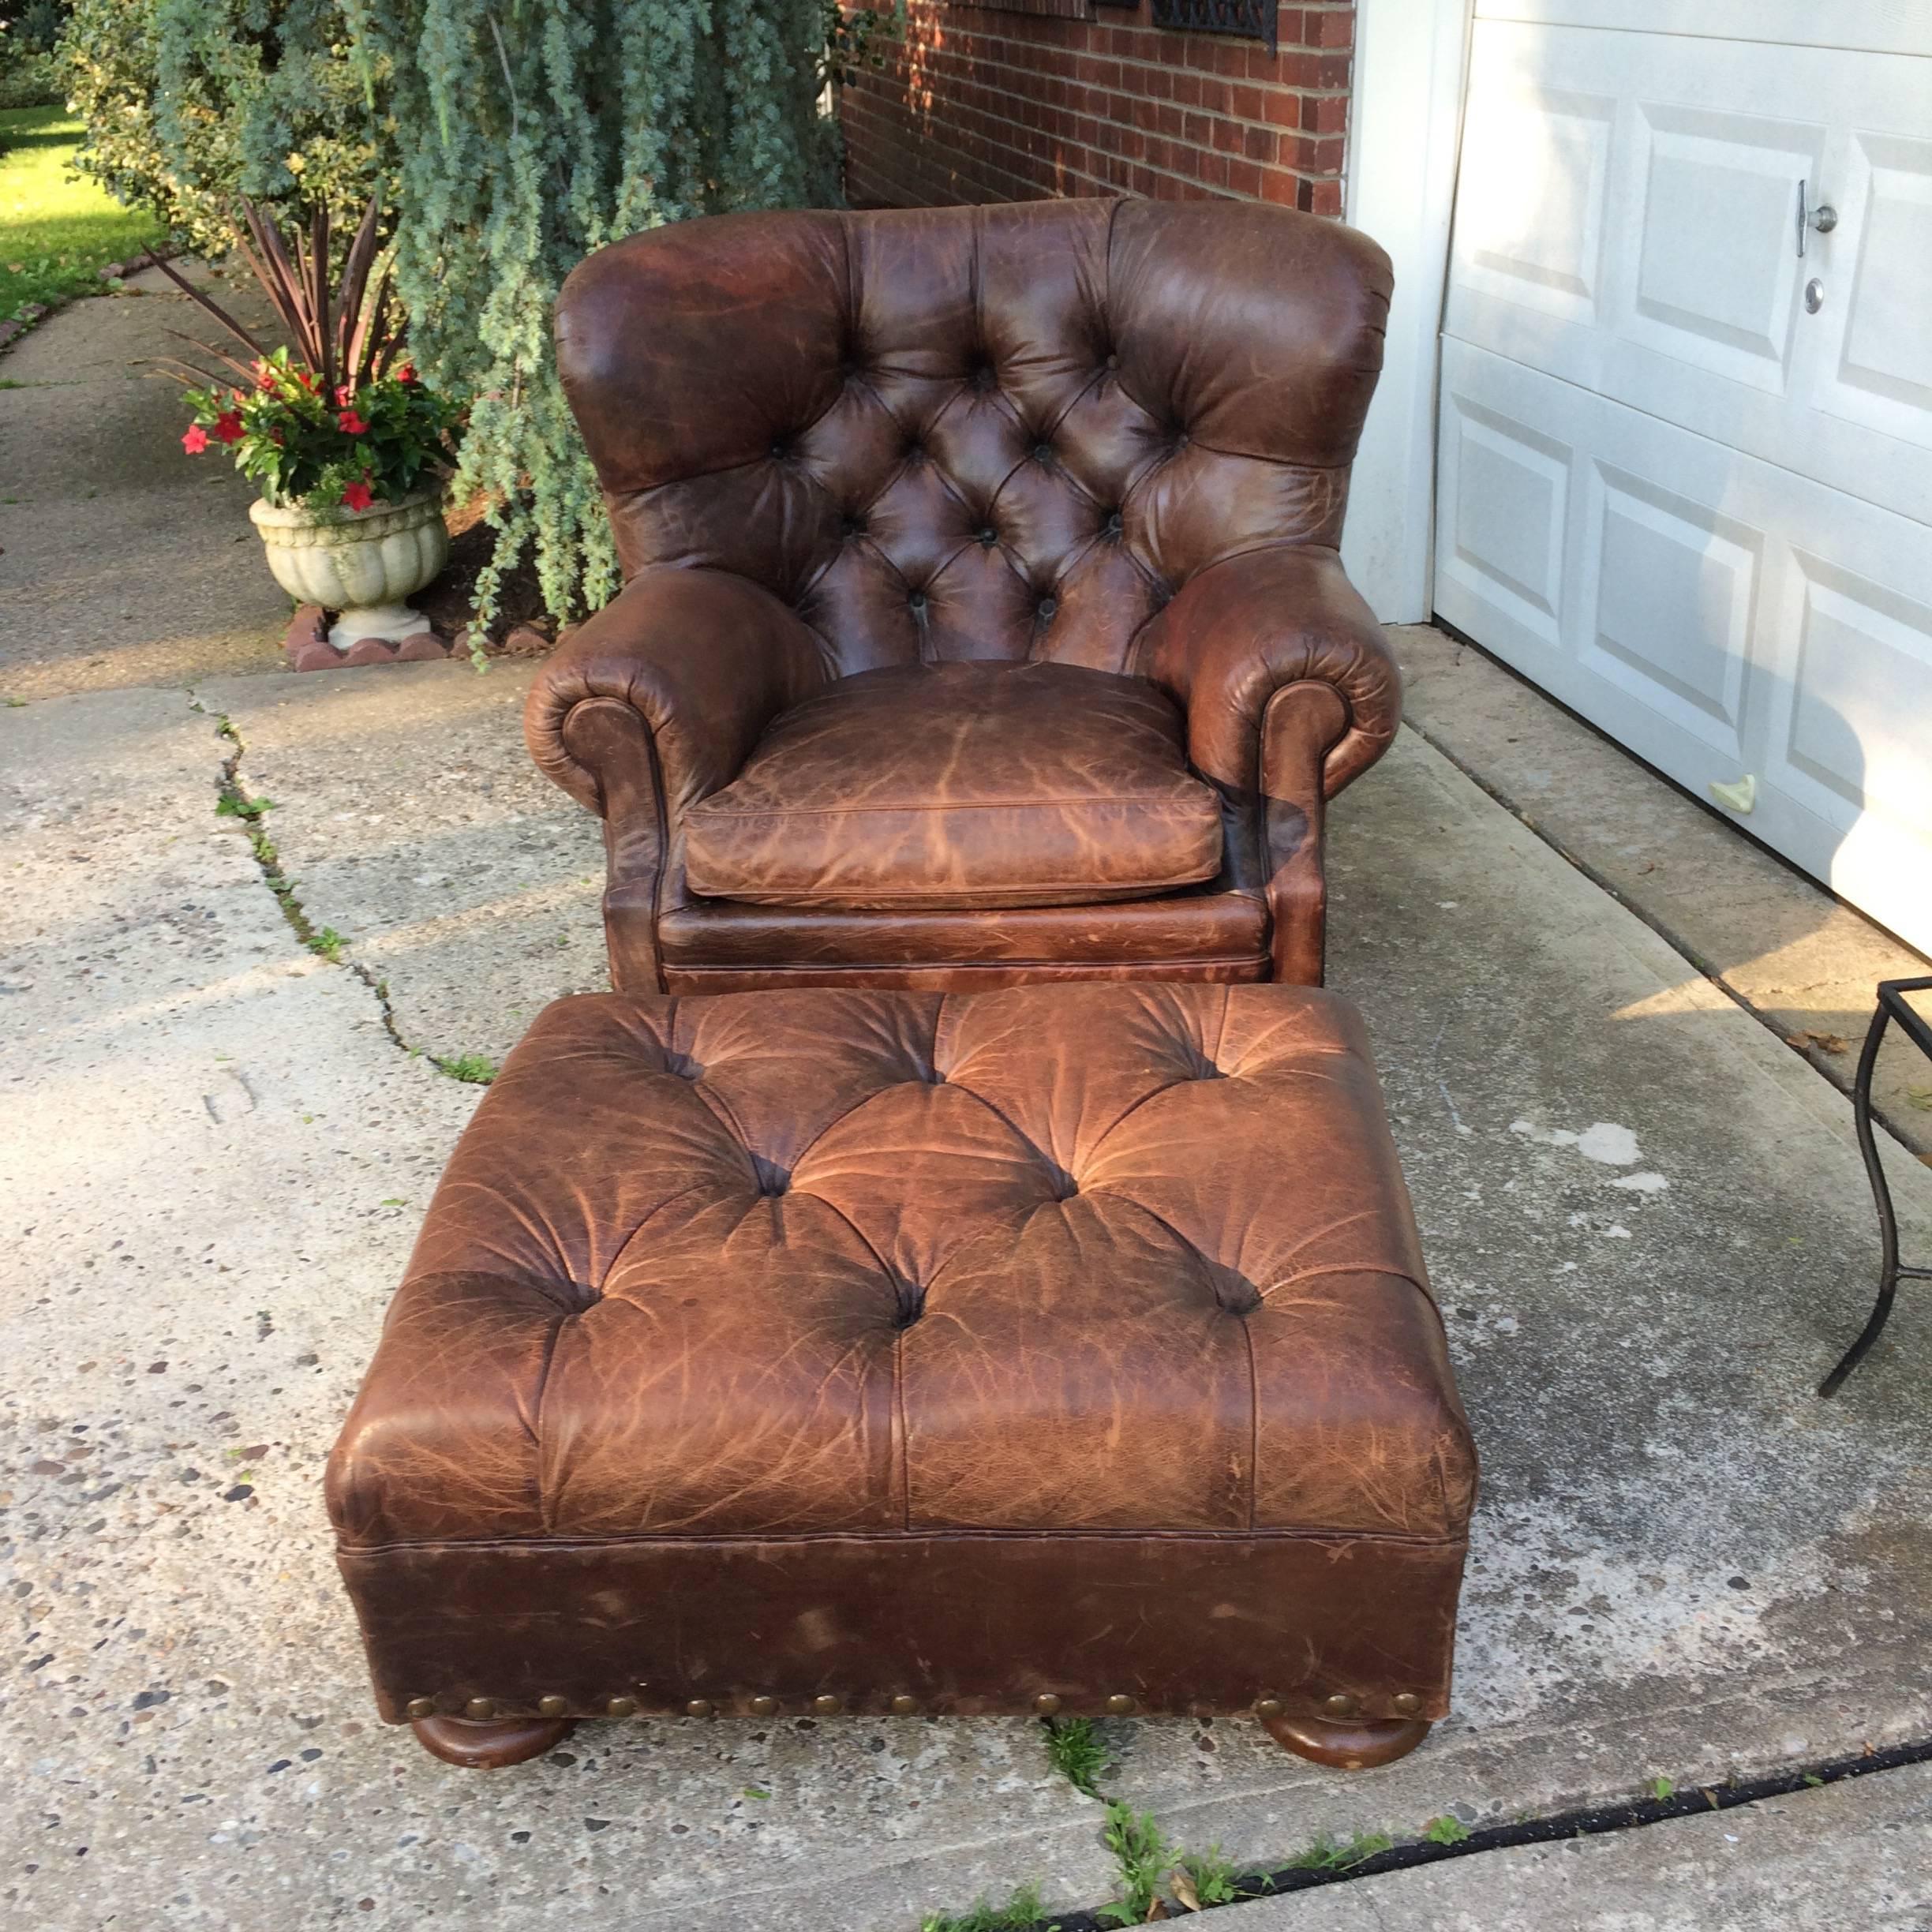 Supple brown leather big manly tufted club chair and matching ottoman with large bronze brass nailhead detailing and bun feet. Ralph Lauren label.
Ottoman is 30 W 25 D 13 H.

Seat arm 36 W.
Seat depth 26.5.